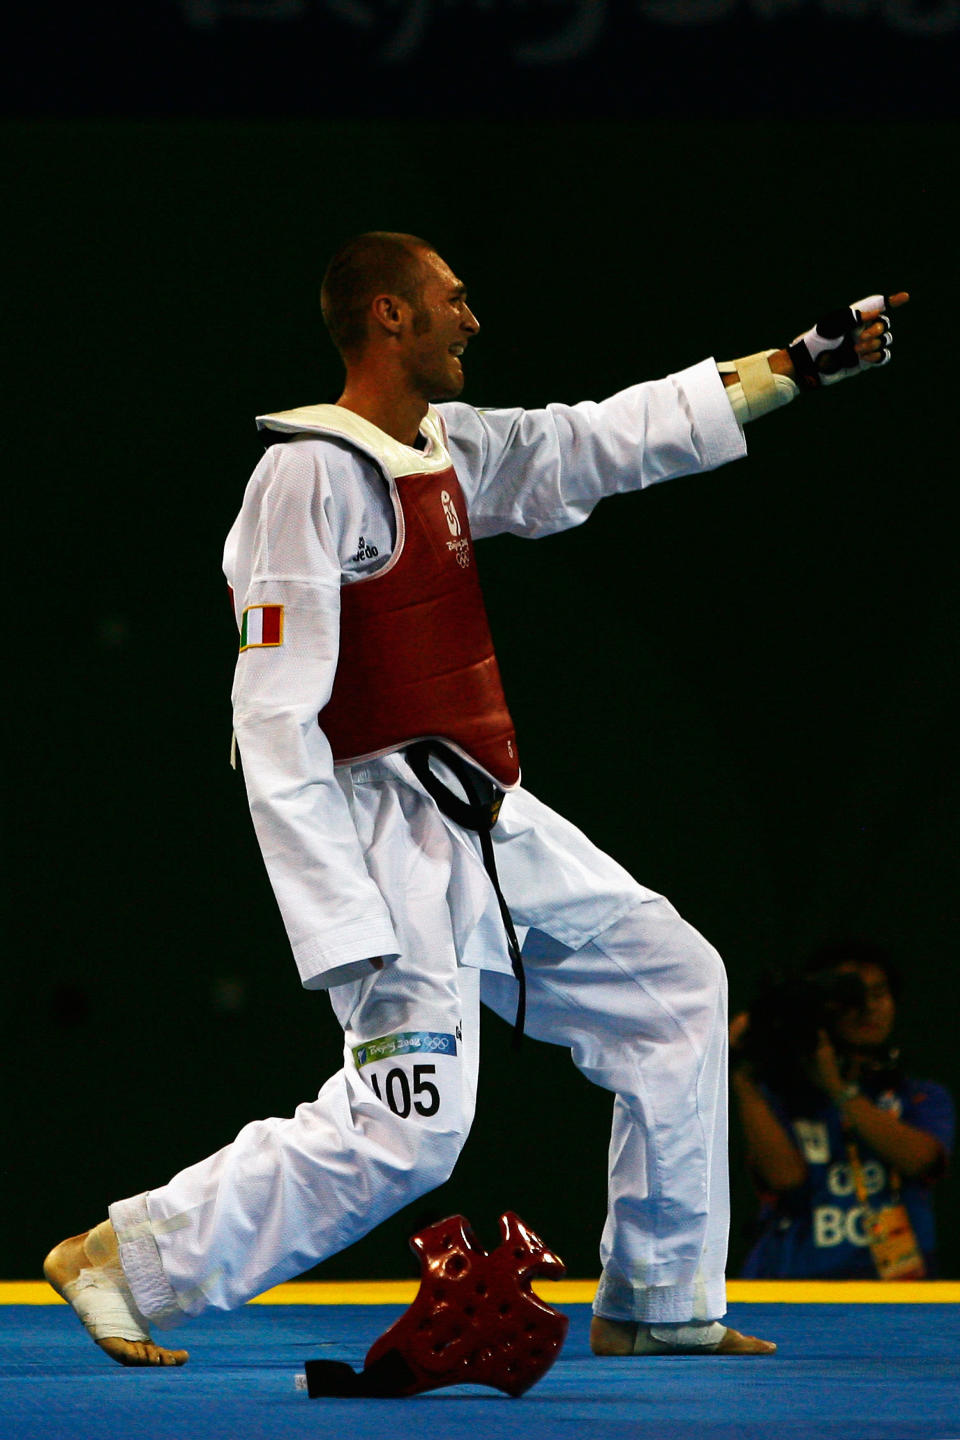 BEIJING - AUGUST 22: Mauro Sarmiento of Italy celebrates after winning the Men's Taekwondo 80kg Semifinal fight against Aaron Cook of Great Britain at the University of Science and Technology Beijing Gymnasium on Day 14 of the Beijing 2008 Olympic Games on August 22, 2008 in Beijing, China. (Photo by Quinn Rooney/Getty Images)